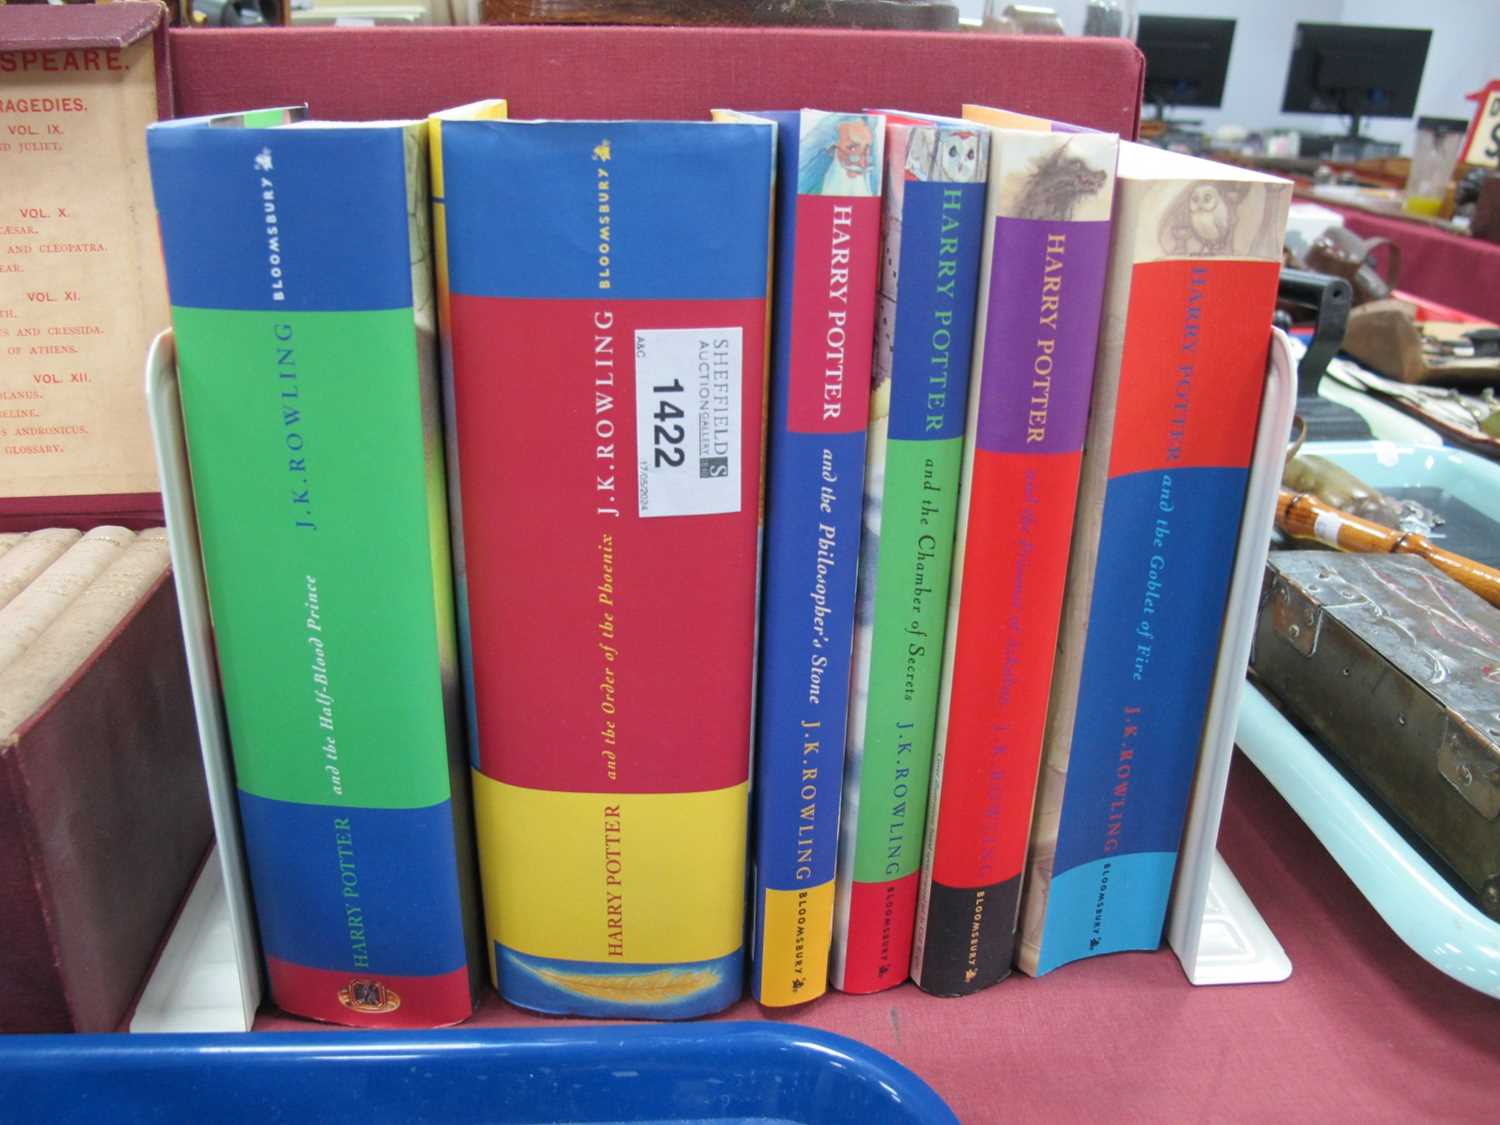 J.K. Rowling, Harry Potter First Edition Books (x 6), including Philosopher's Stone 1997, Chamber of